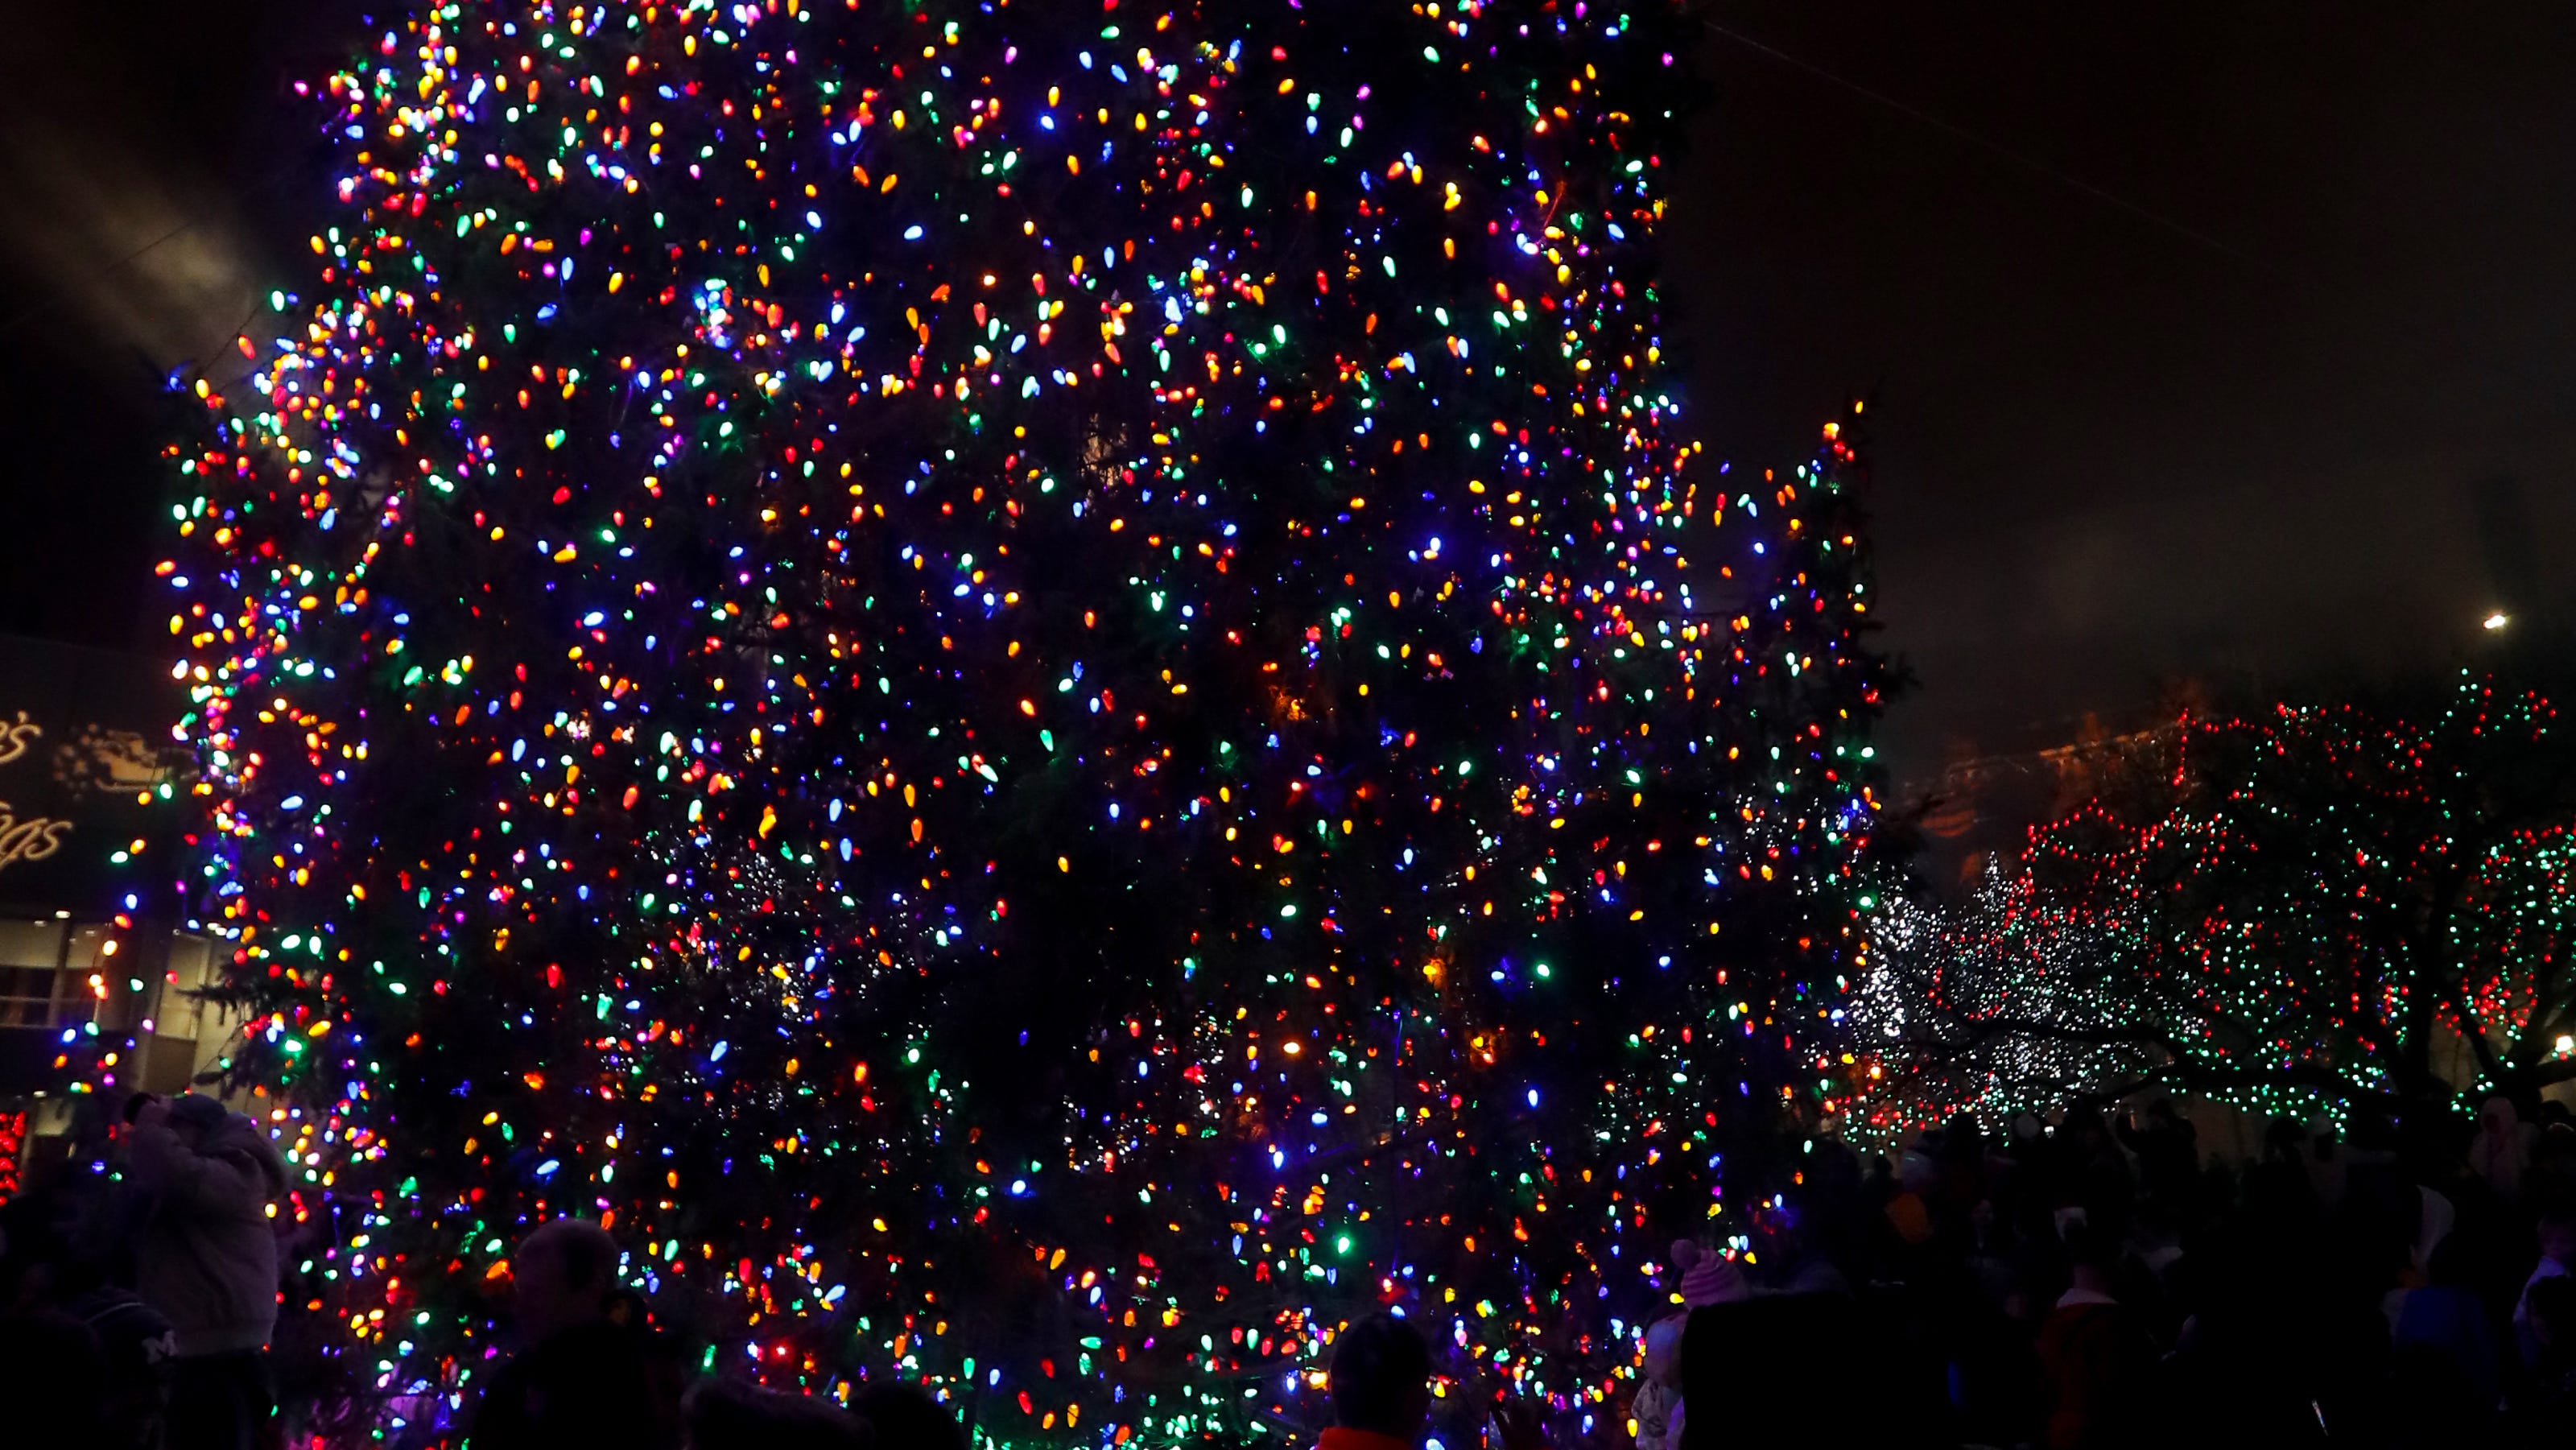 Light Up Louisville 2021 guide: When is the Christmas tree lighting?